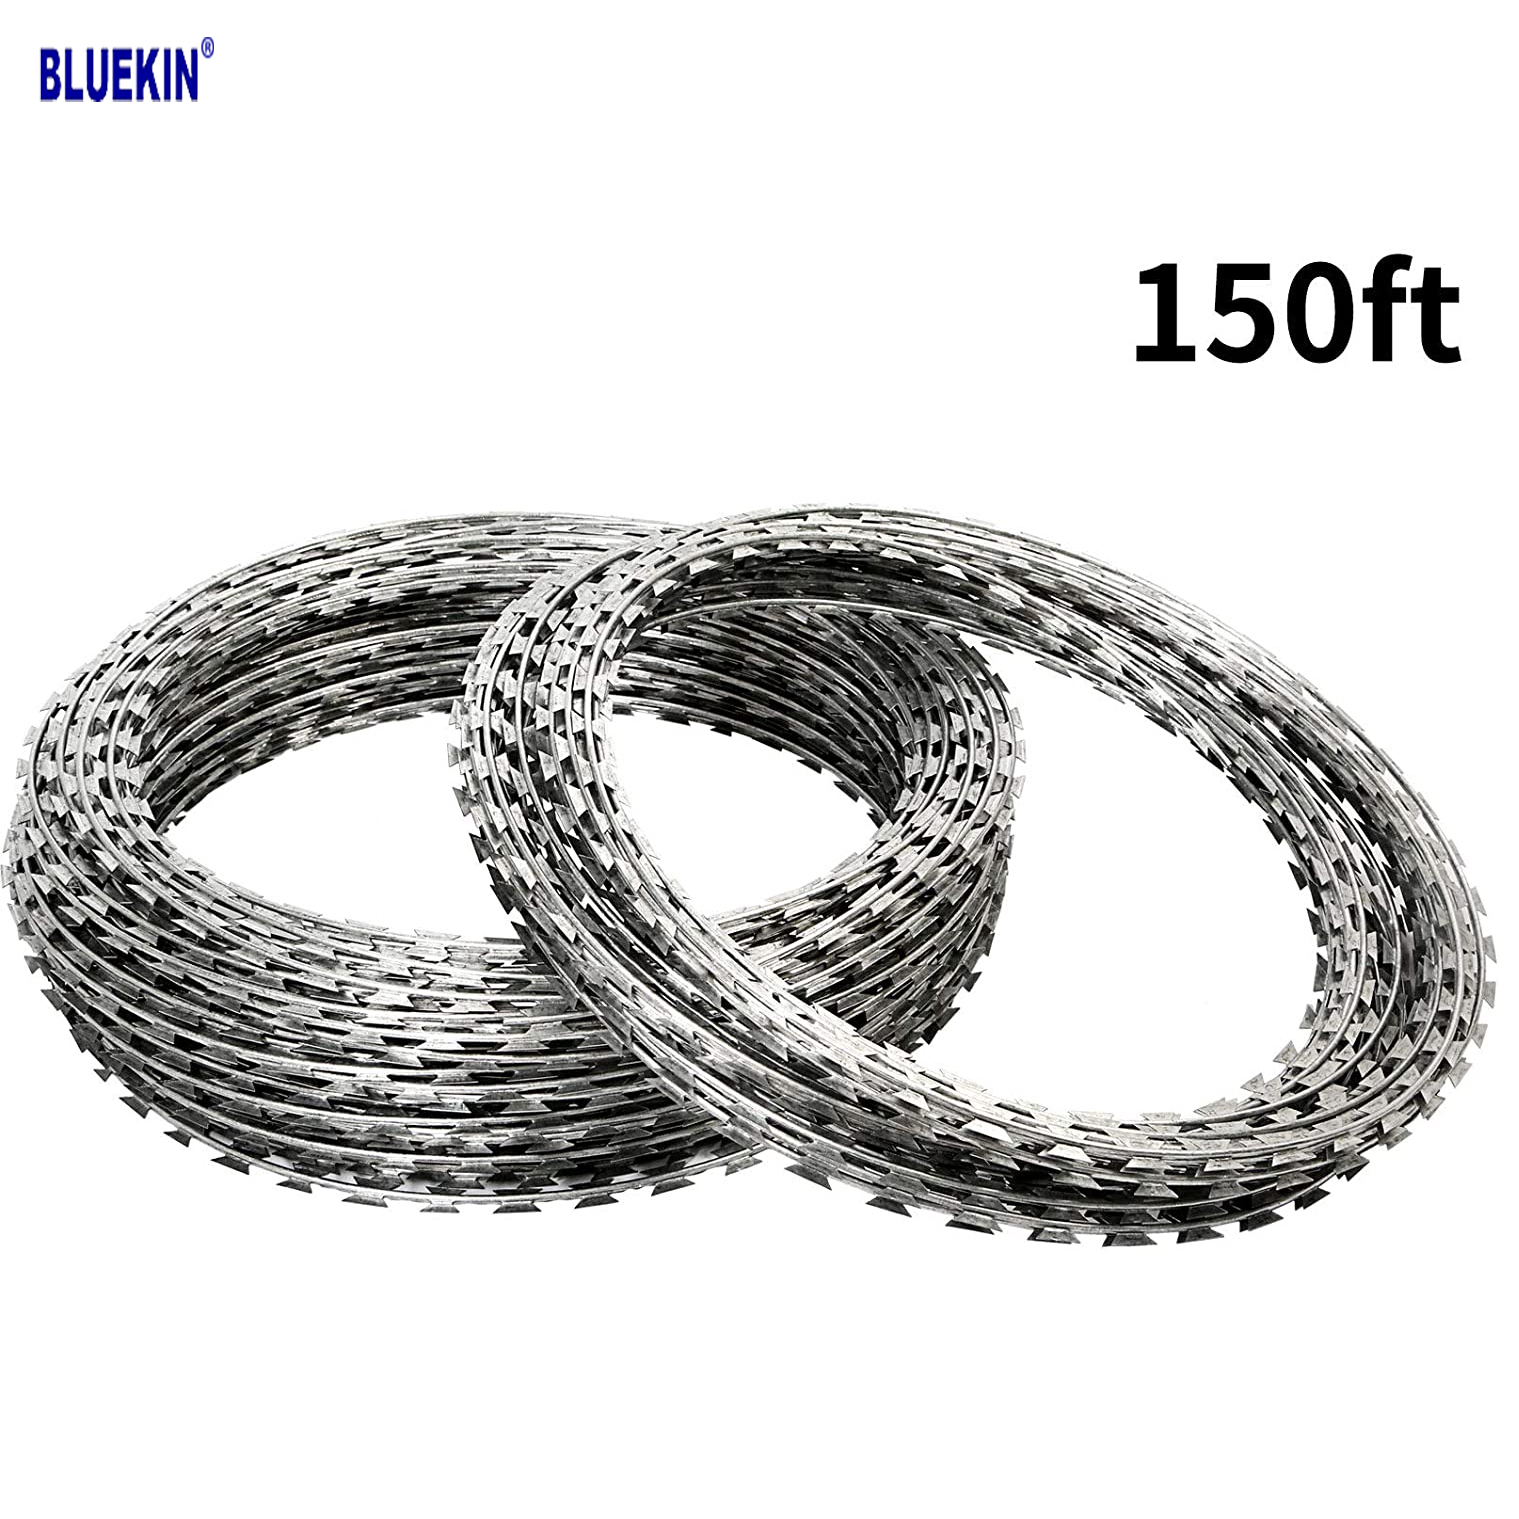 Single coil razor wire is restless and can be easily installed